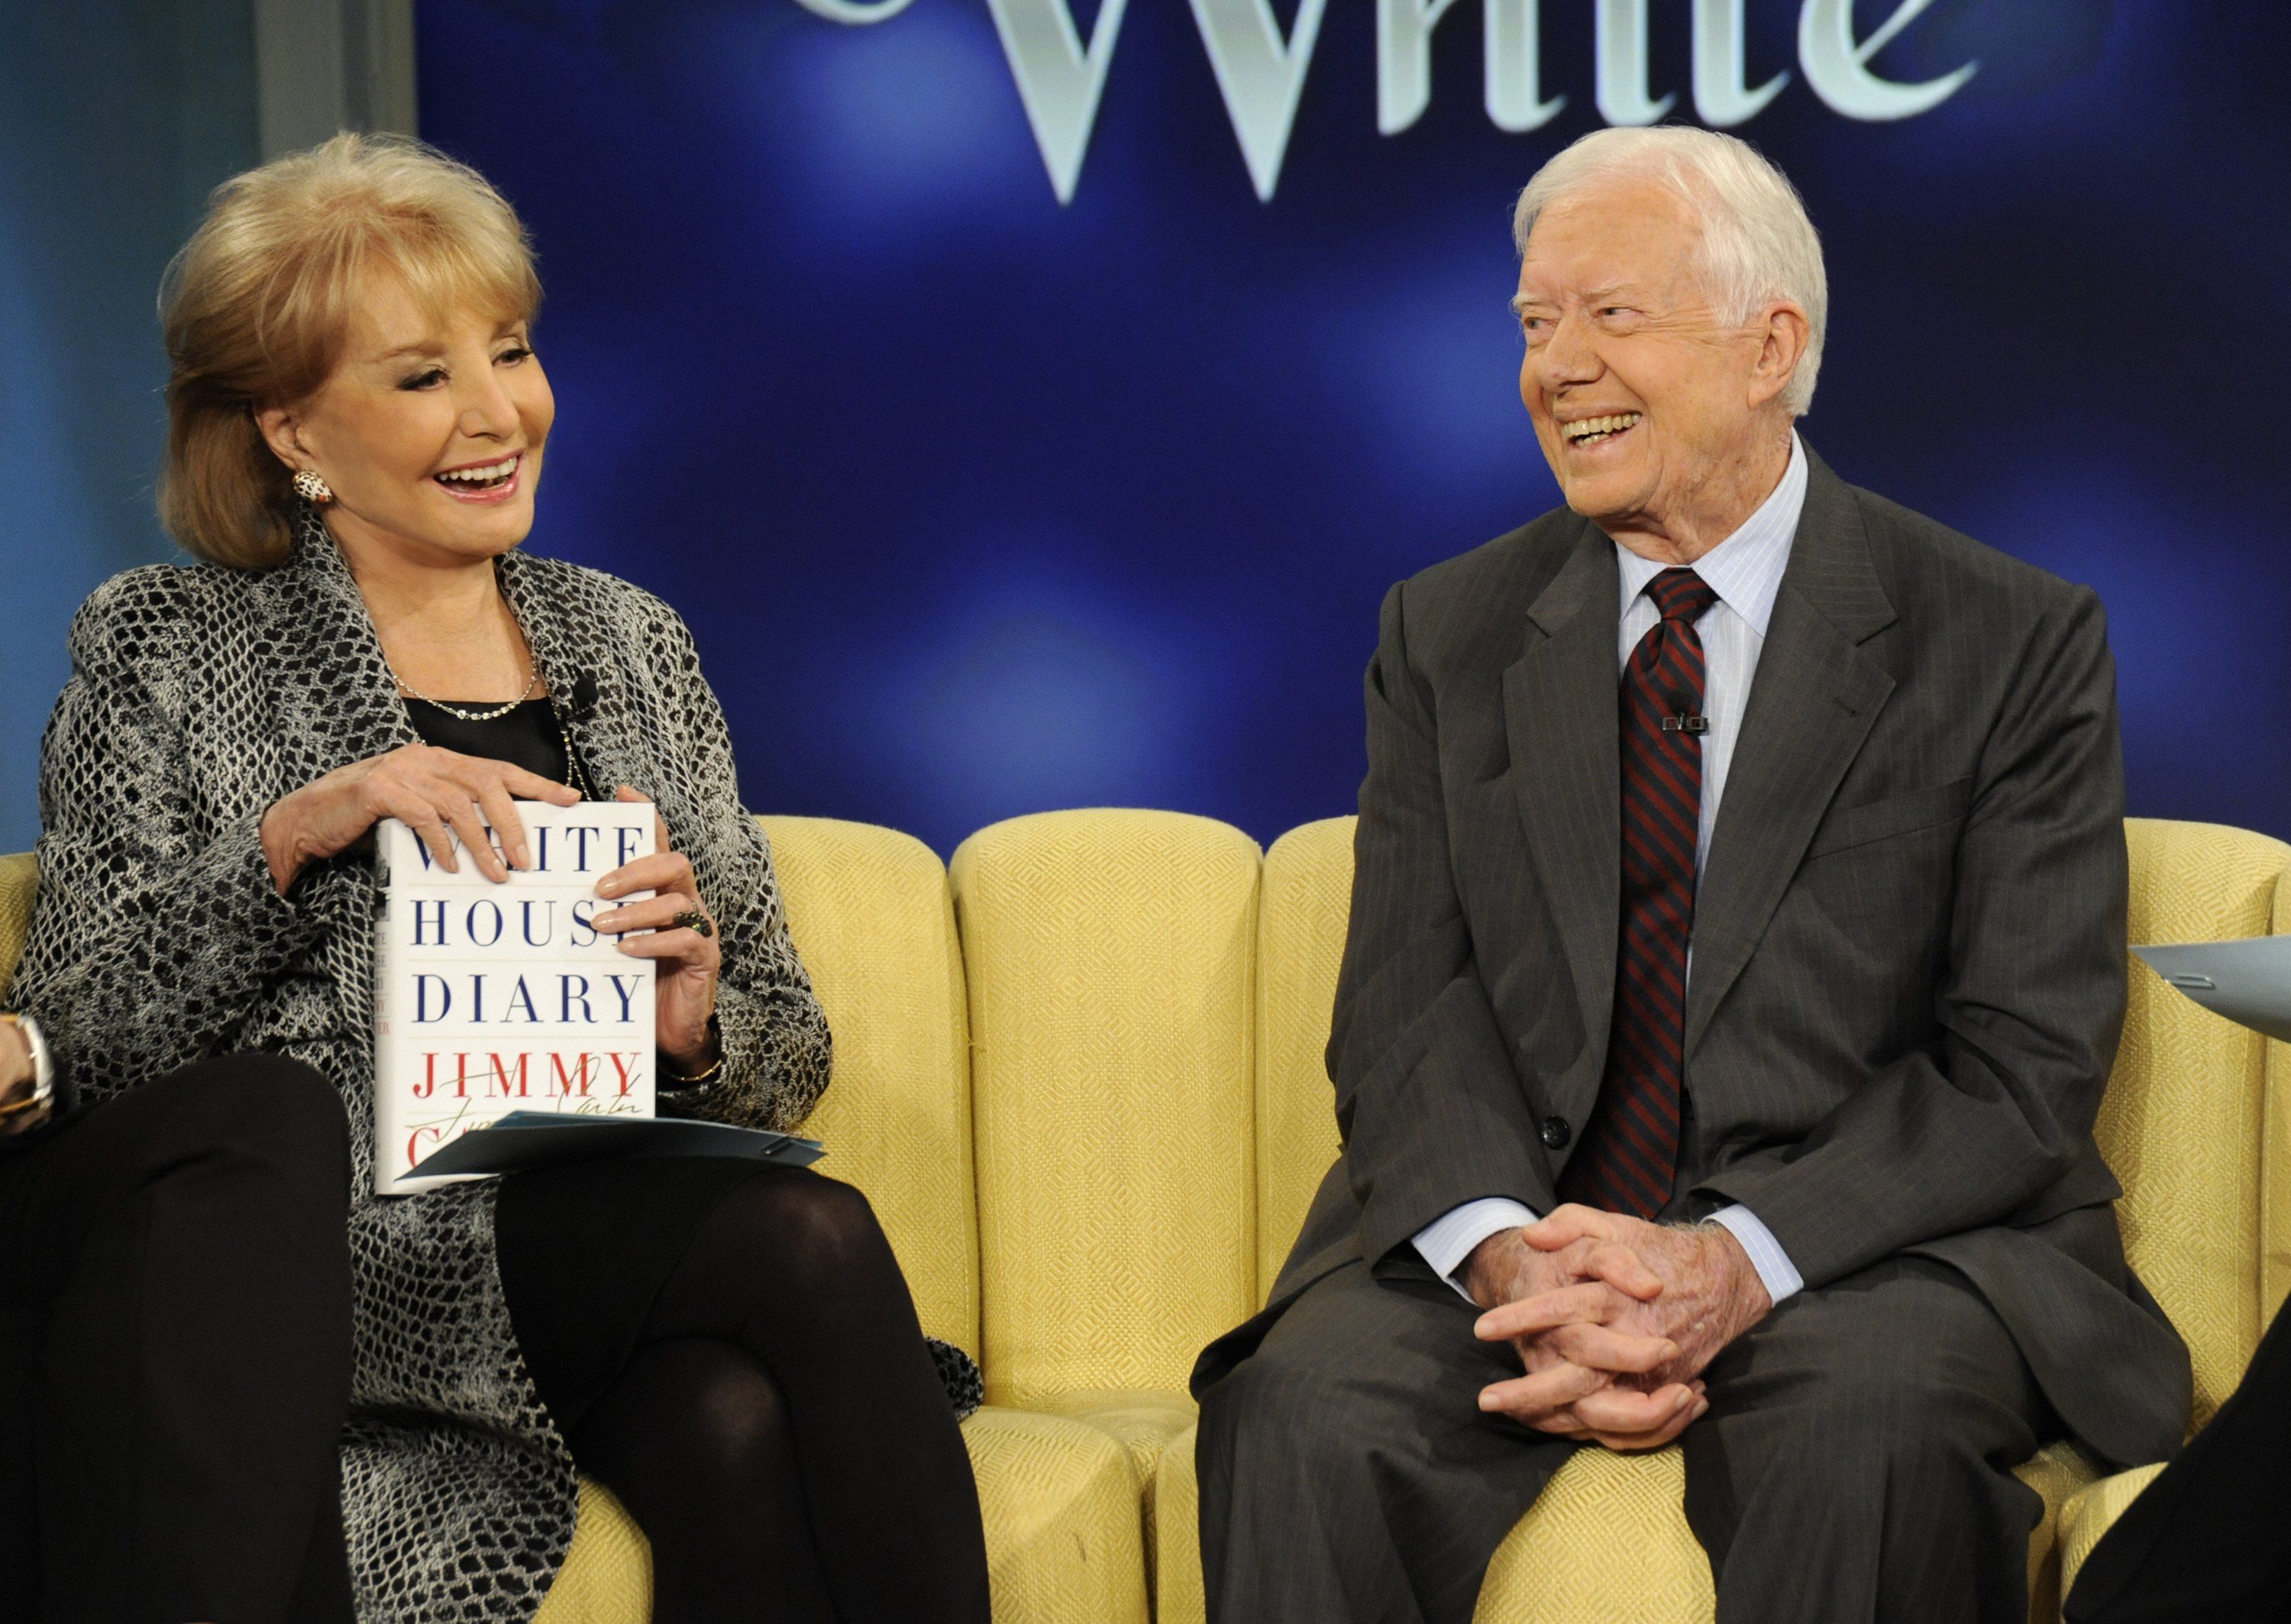 President Jimmy Carter joins the co-hosts on today's episode of "The View."